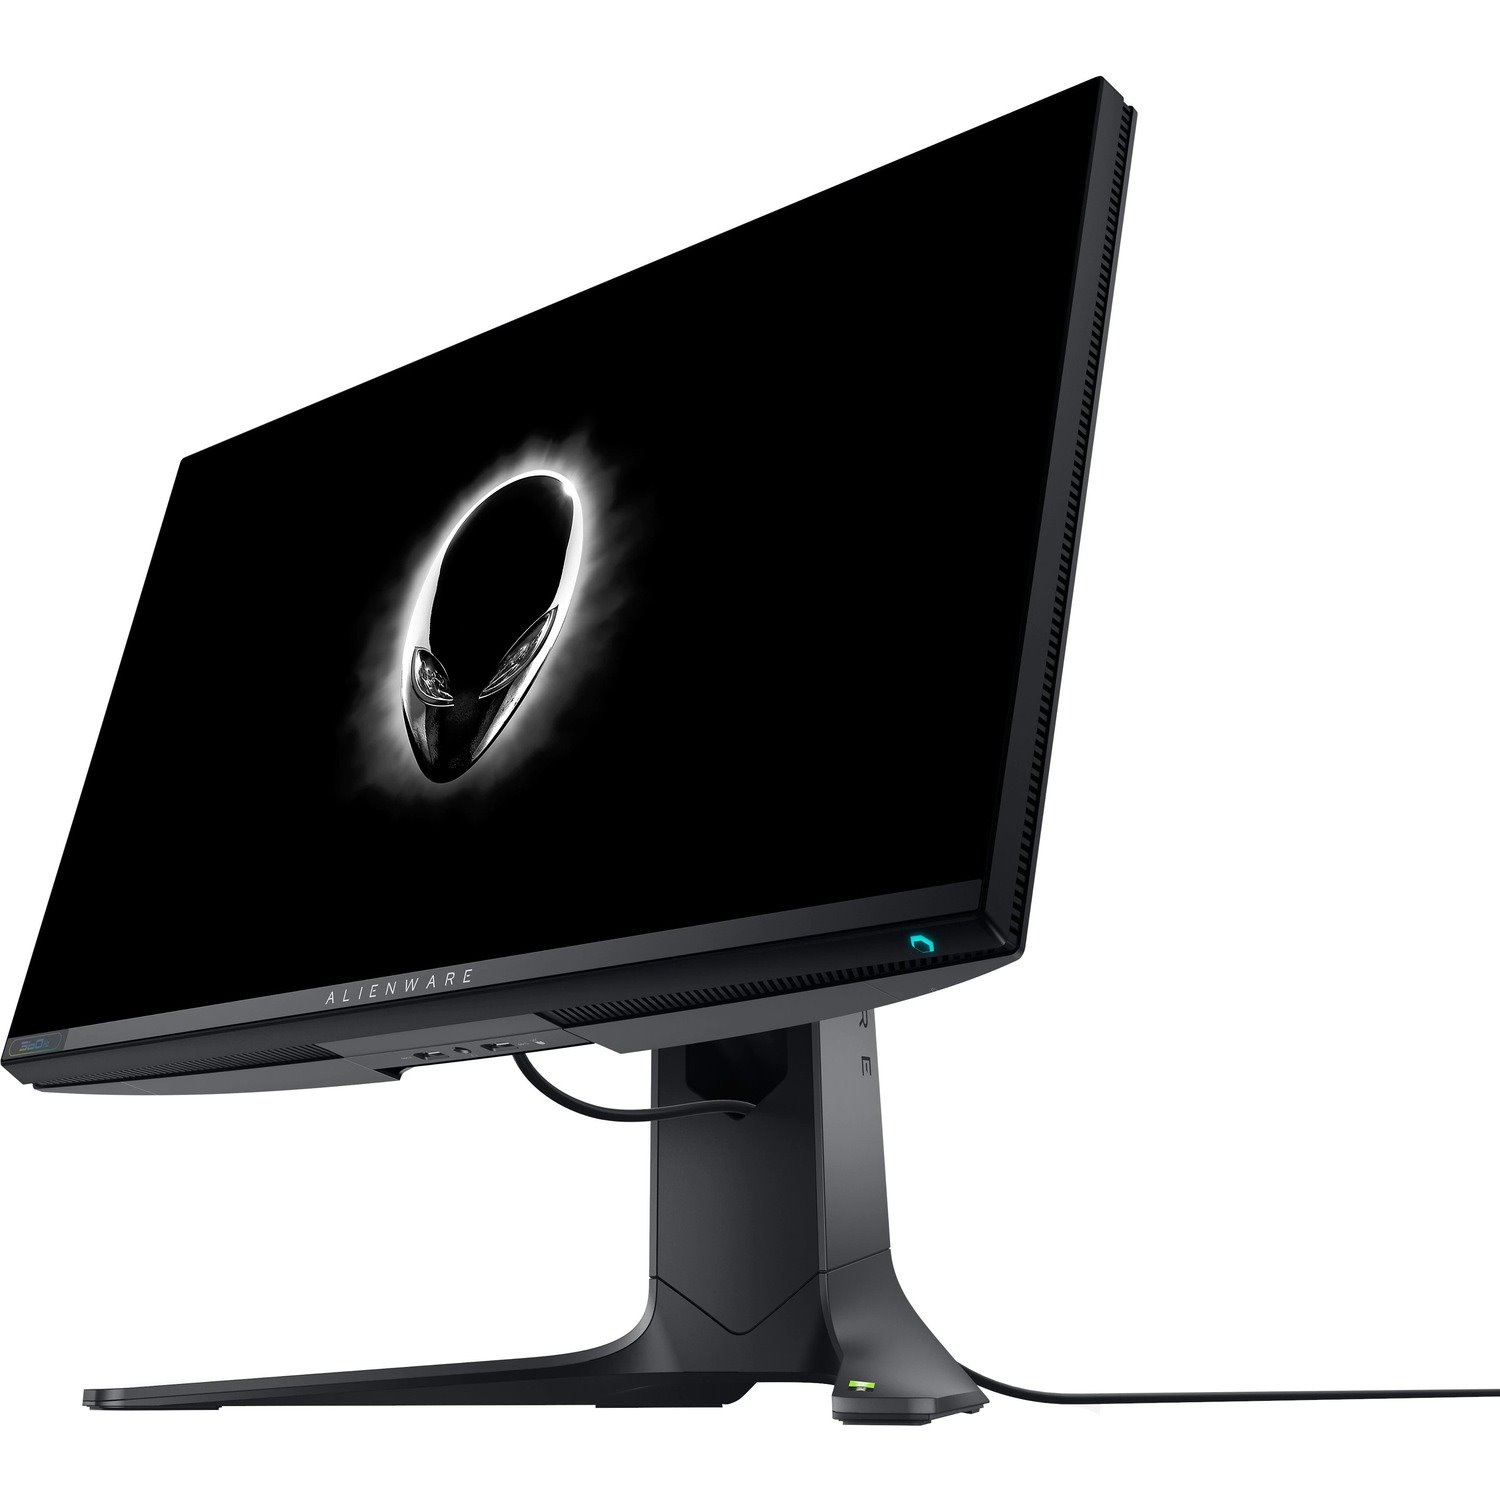 Alienware AW2521H 25" Class Full HD Gaming LCD Monitor - 16:9 - Black